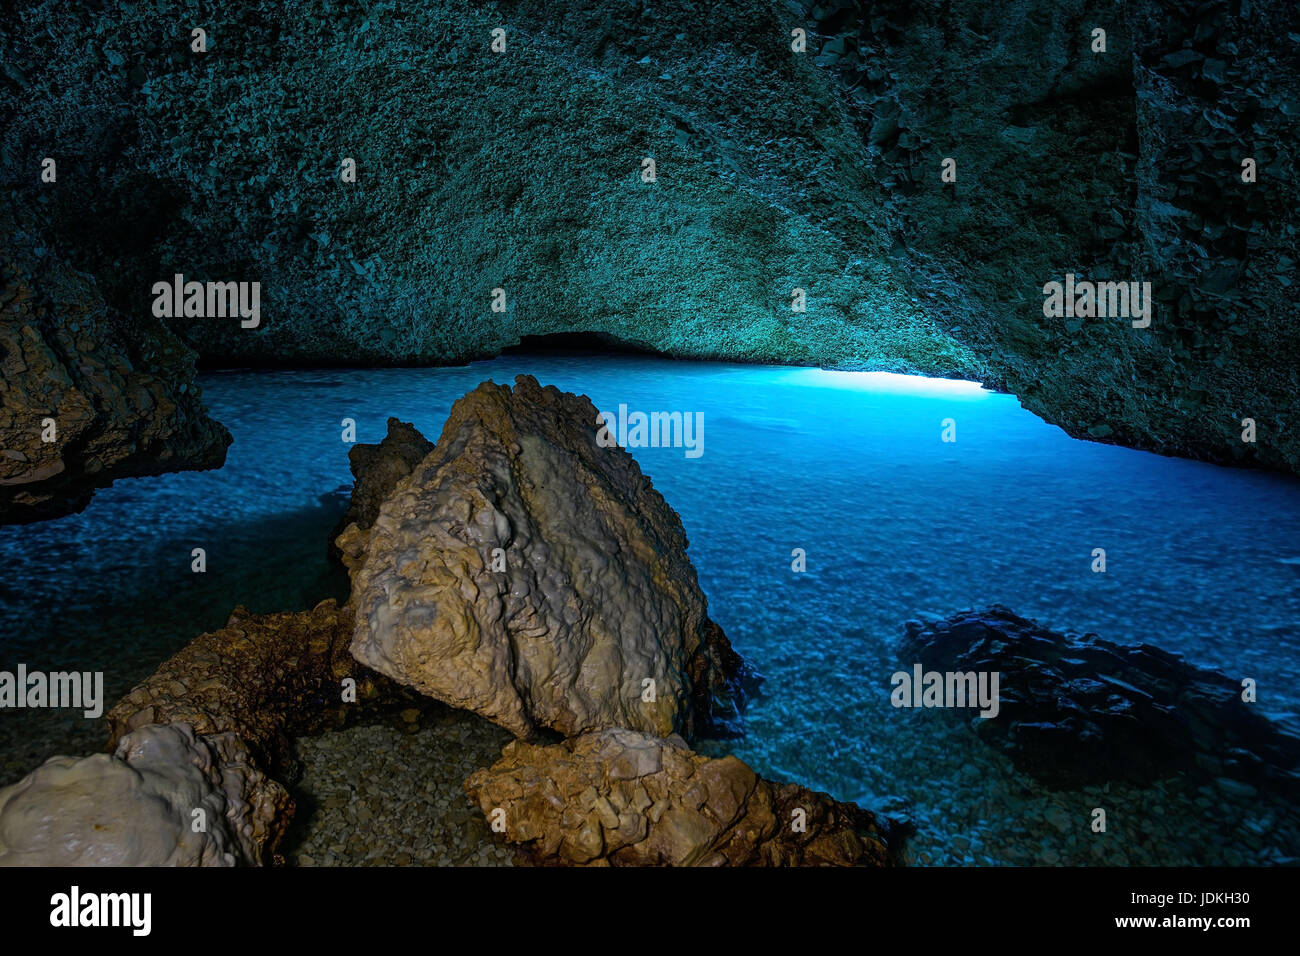 Plava Grotta, cave with the radiant blue water which originates from sunlight occurring under water. Croatia, Europe, , Höhle mit leuchtend blauem Was Stock Photo